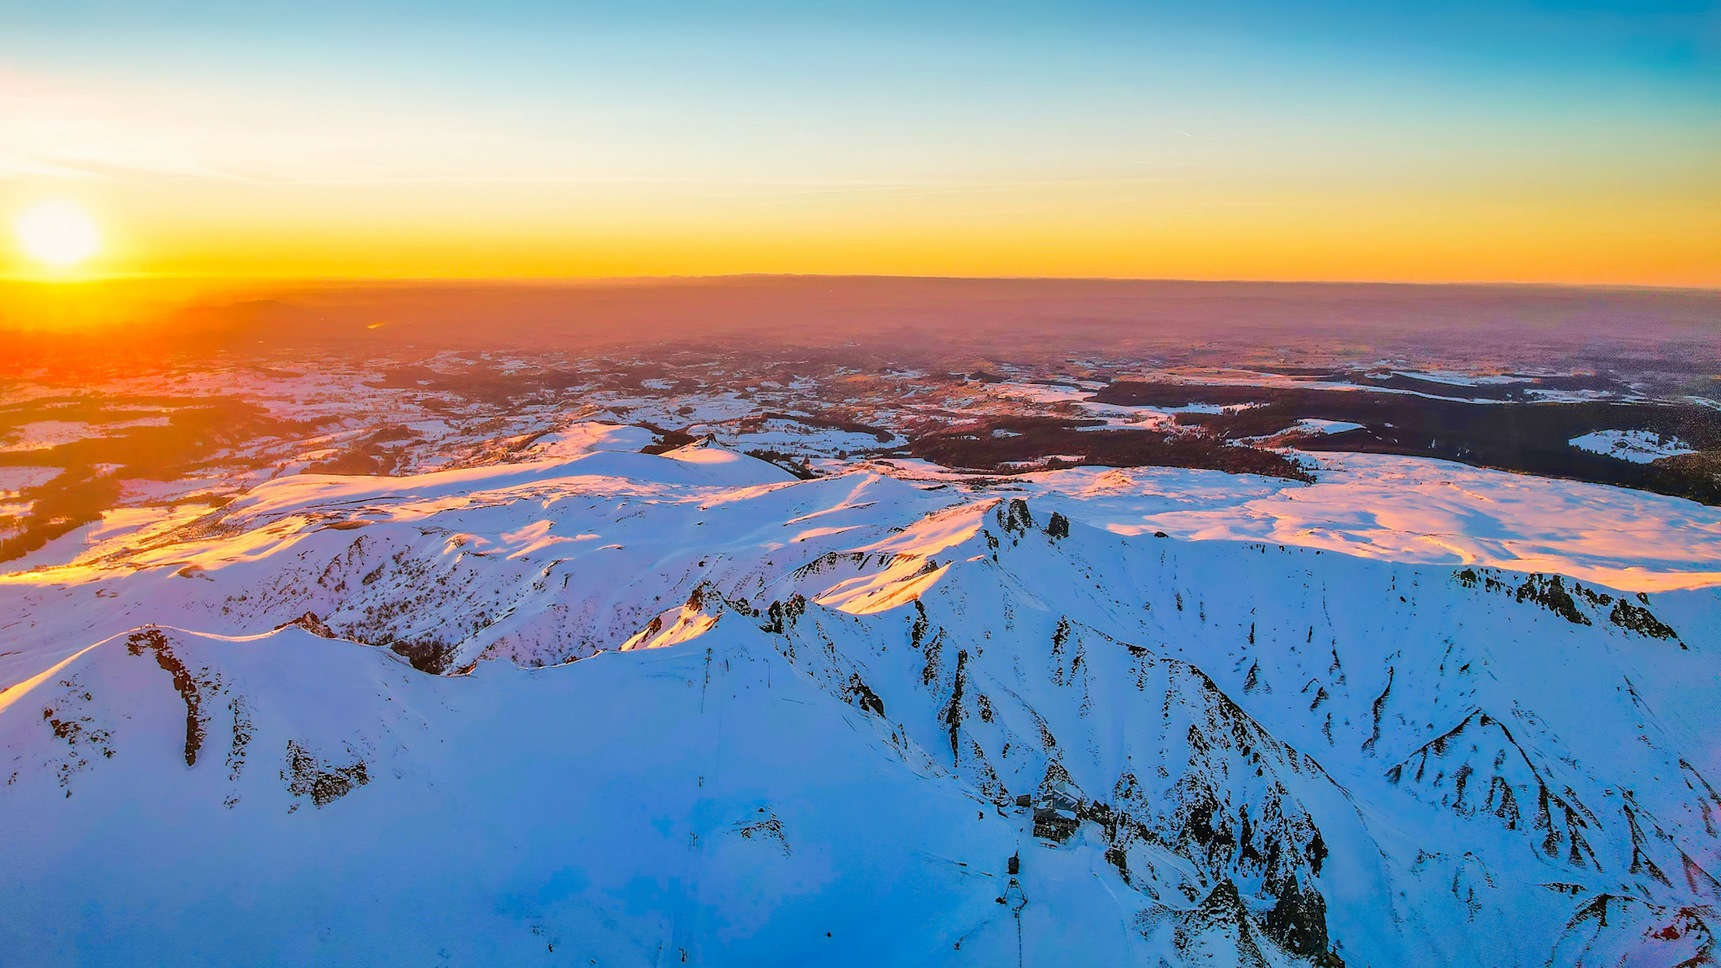 Sunset at Puy de Sancy, over the Val d'Enfer and the arrival station of the Sancy cable car